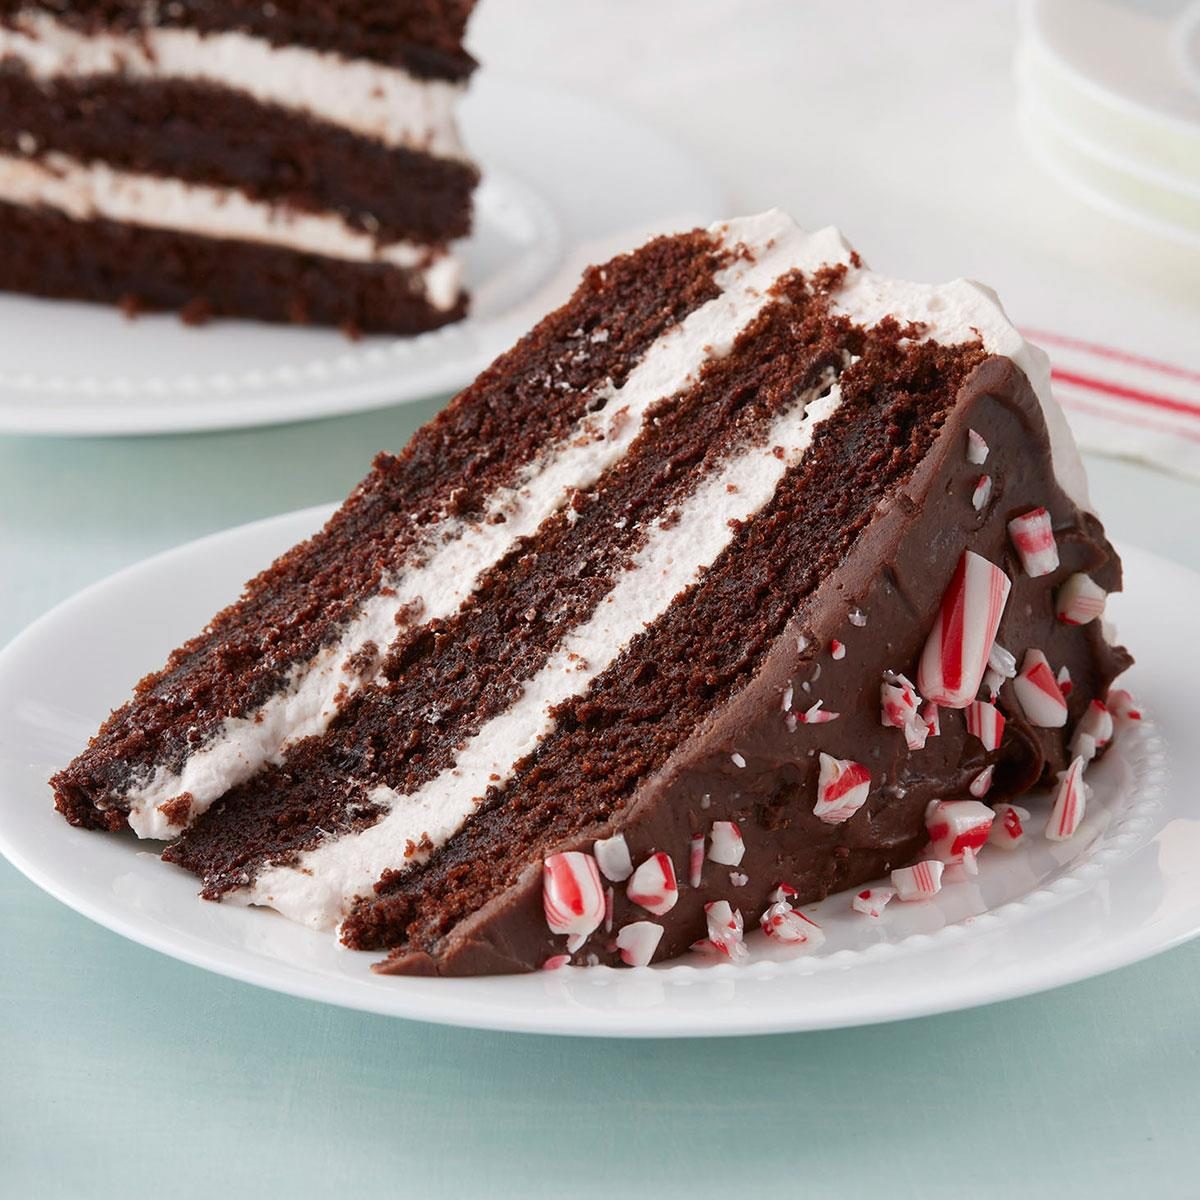 Chocolate Peppermint Cake Recipe: How to Make It